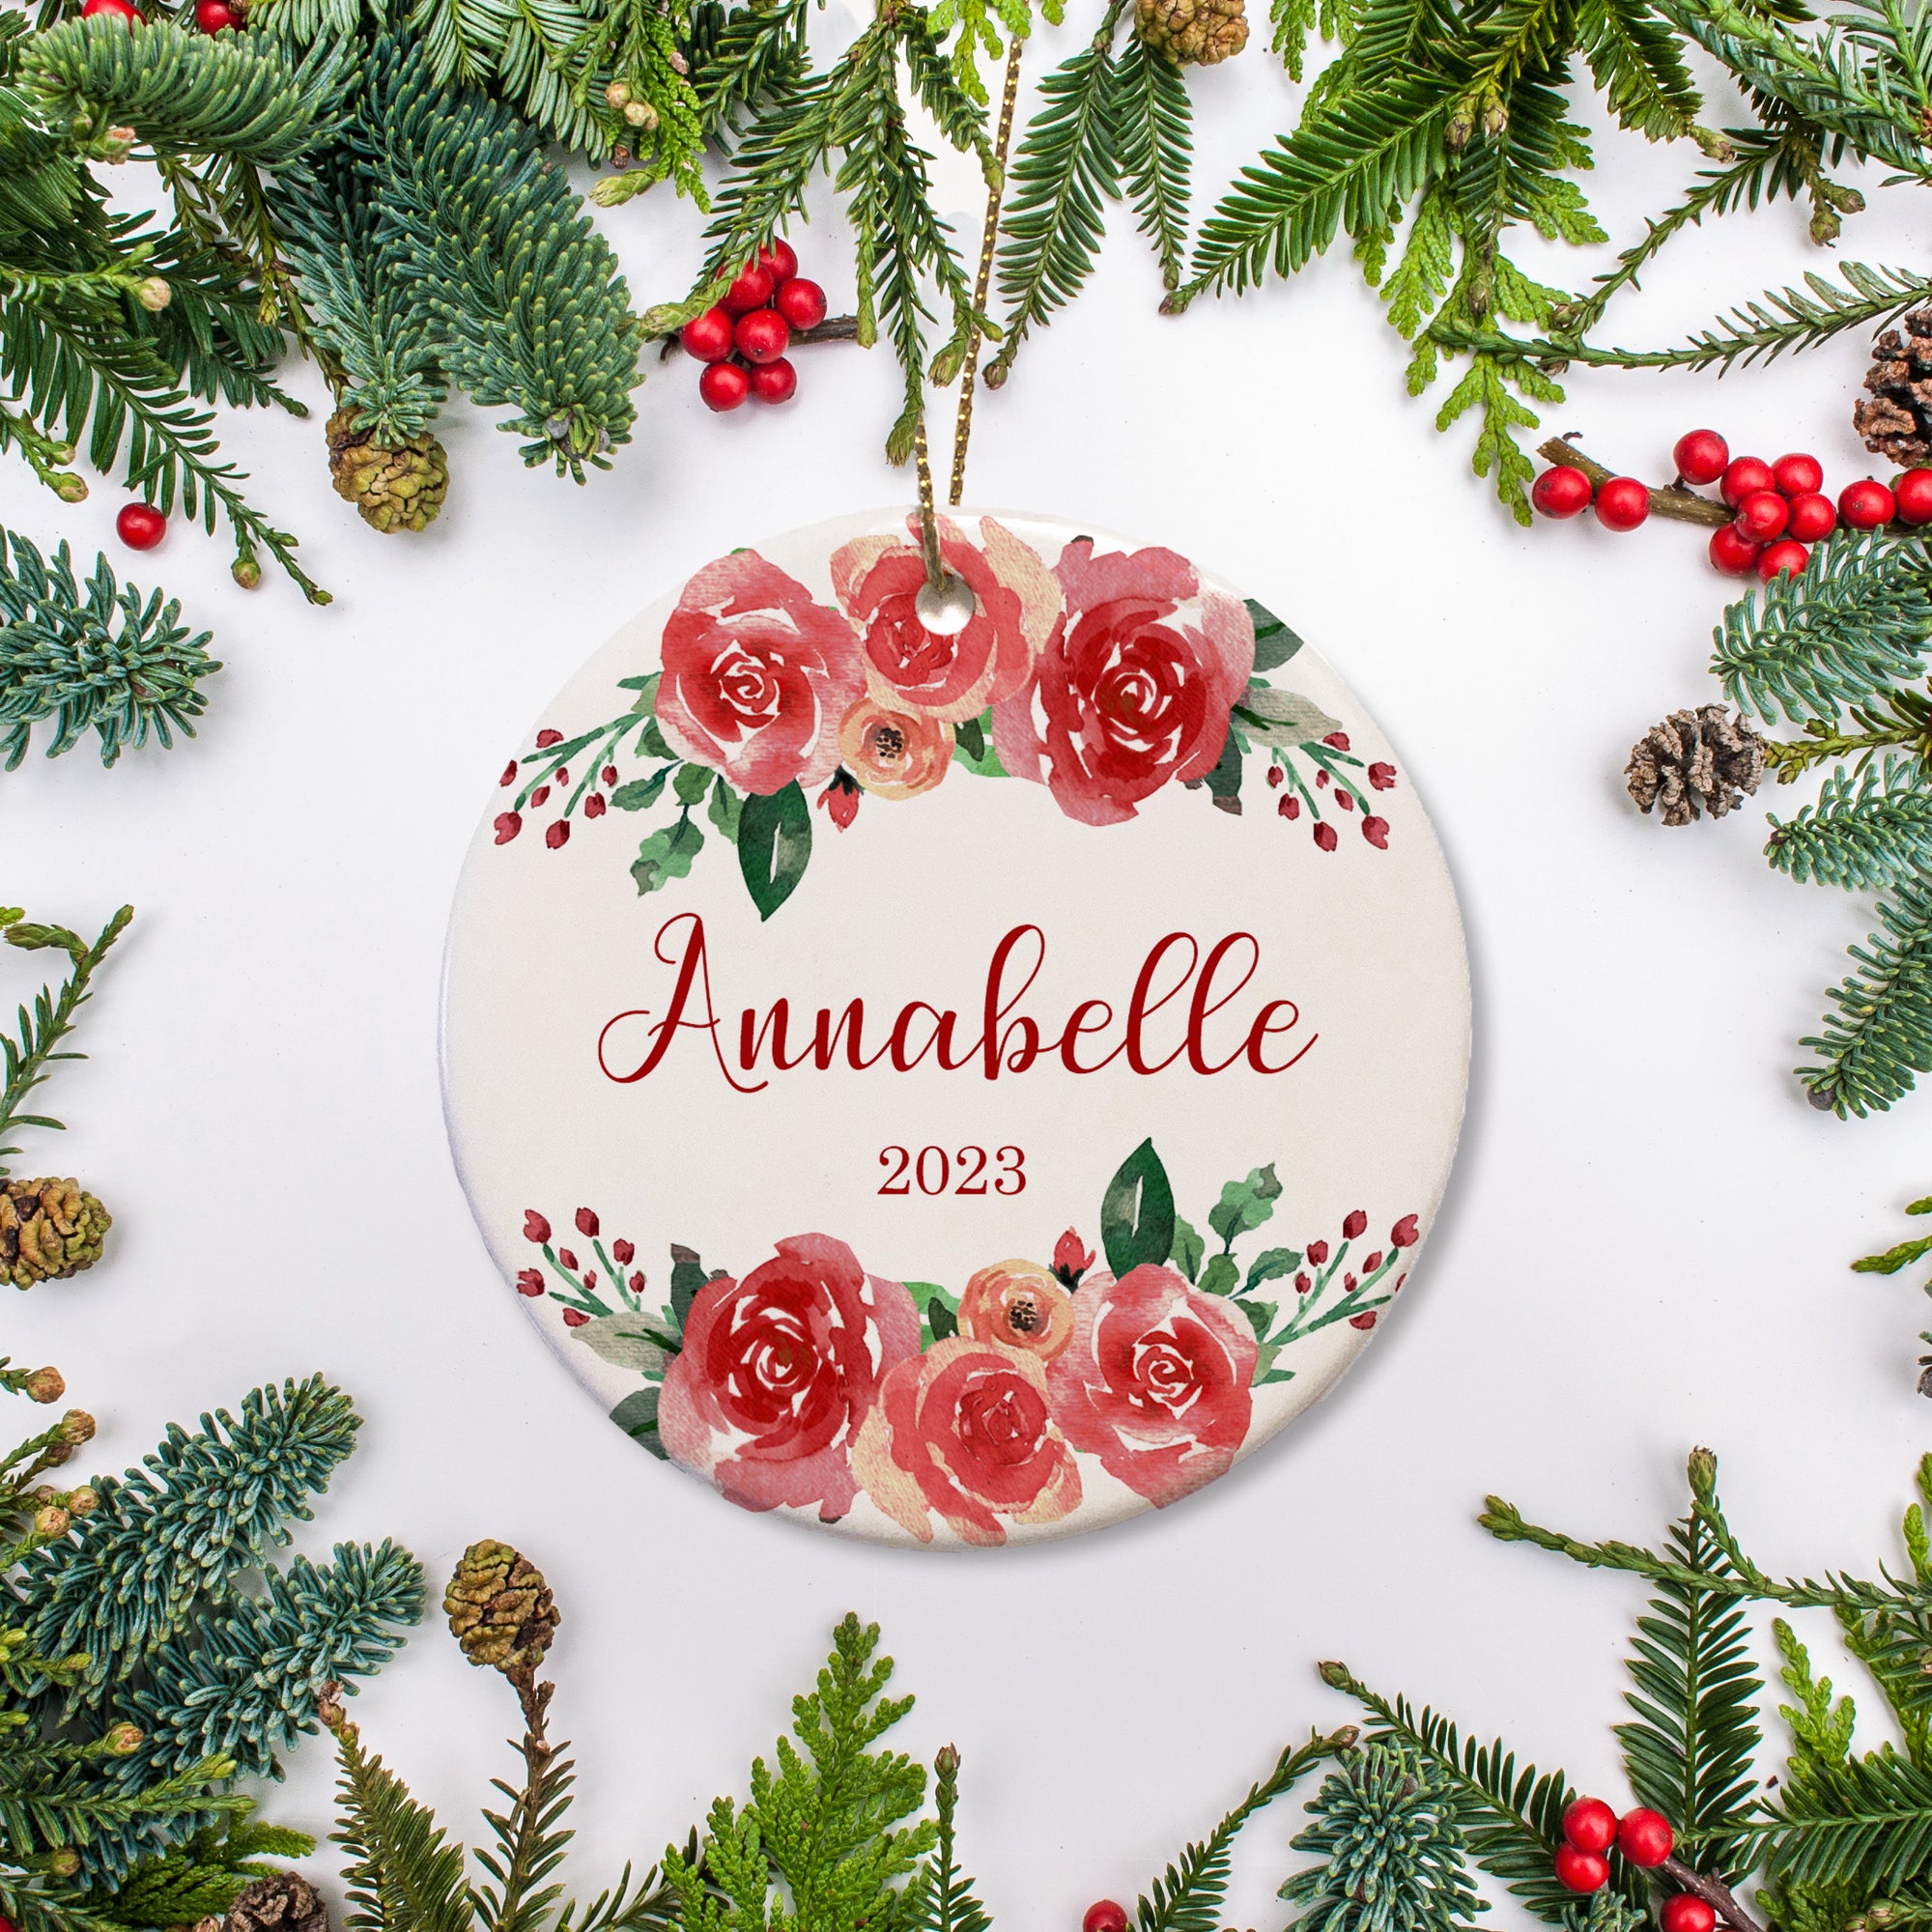 Red roses surround the name and year on this keepsake ornament.